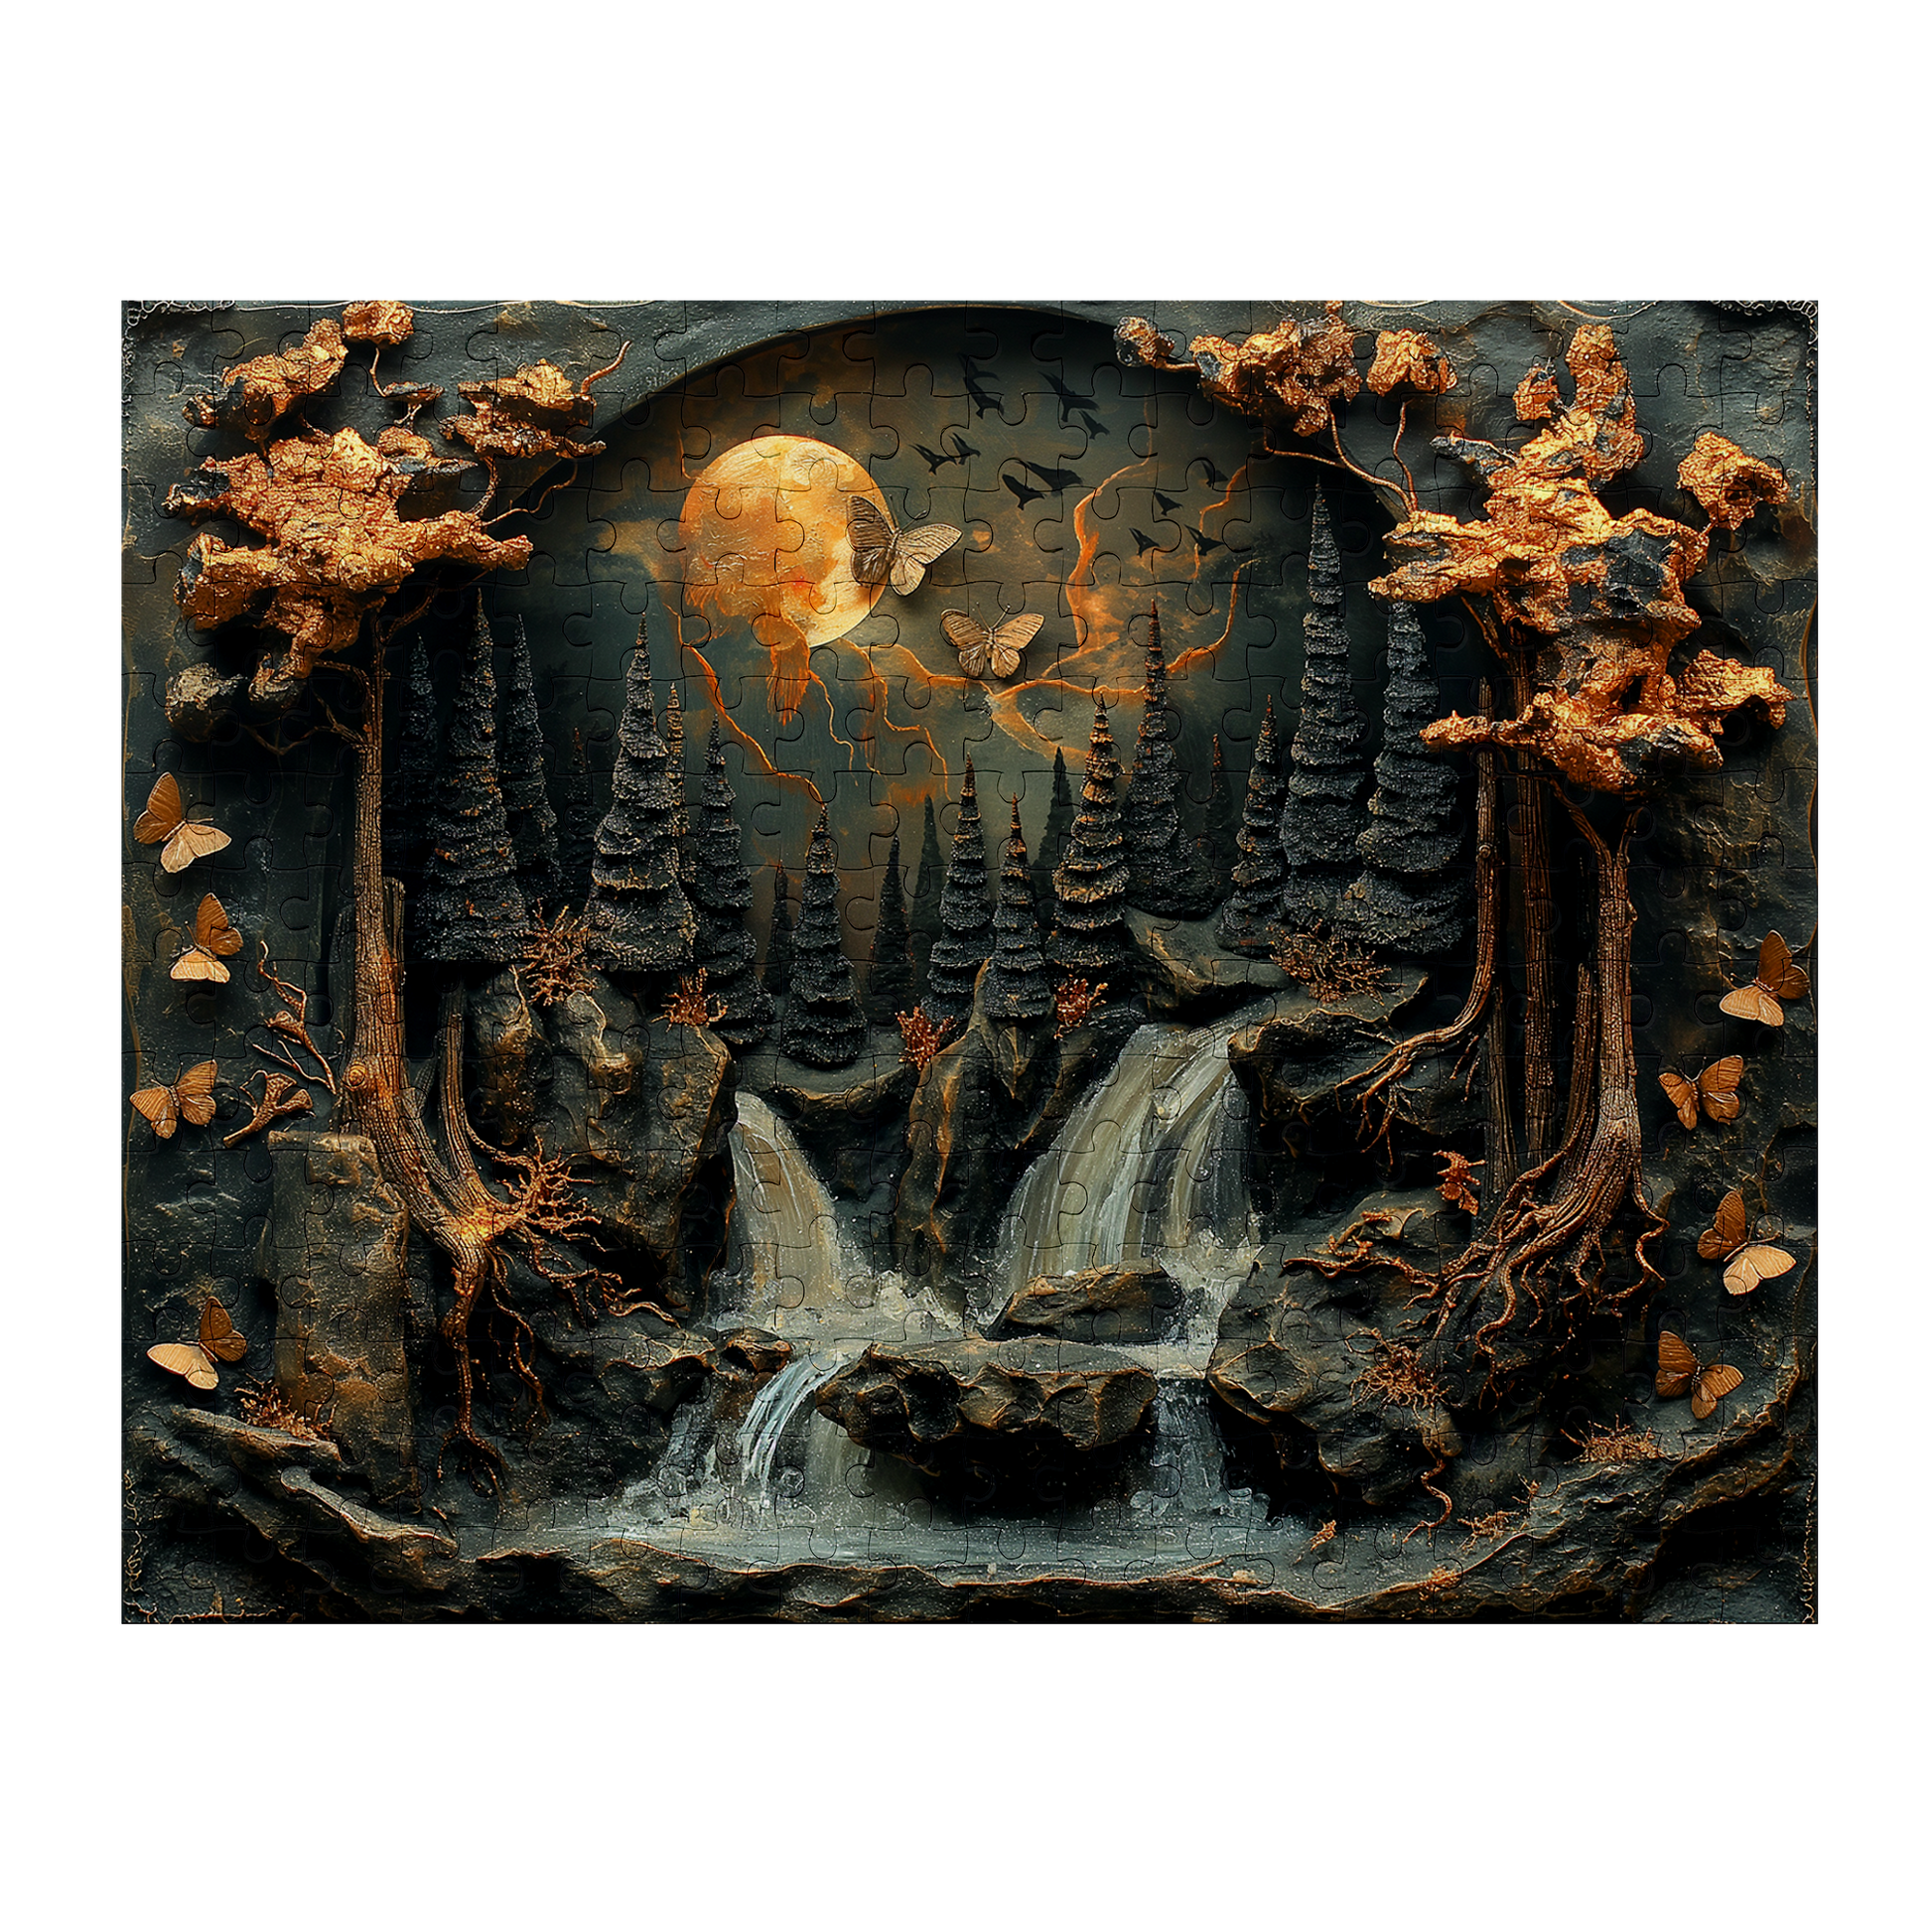 Cascade - Premium Jigsaw Puzzle - Ornate, Fantasy, Carving, Waterfall - Multiple Sizes Available